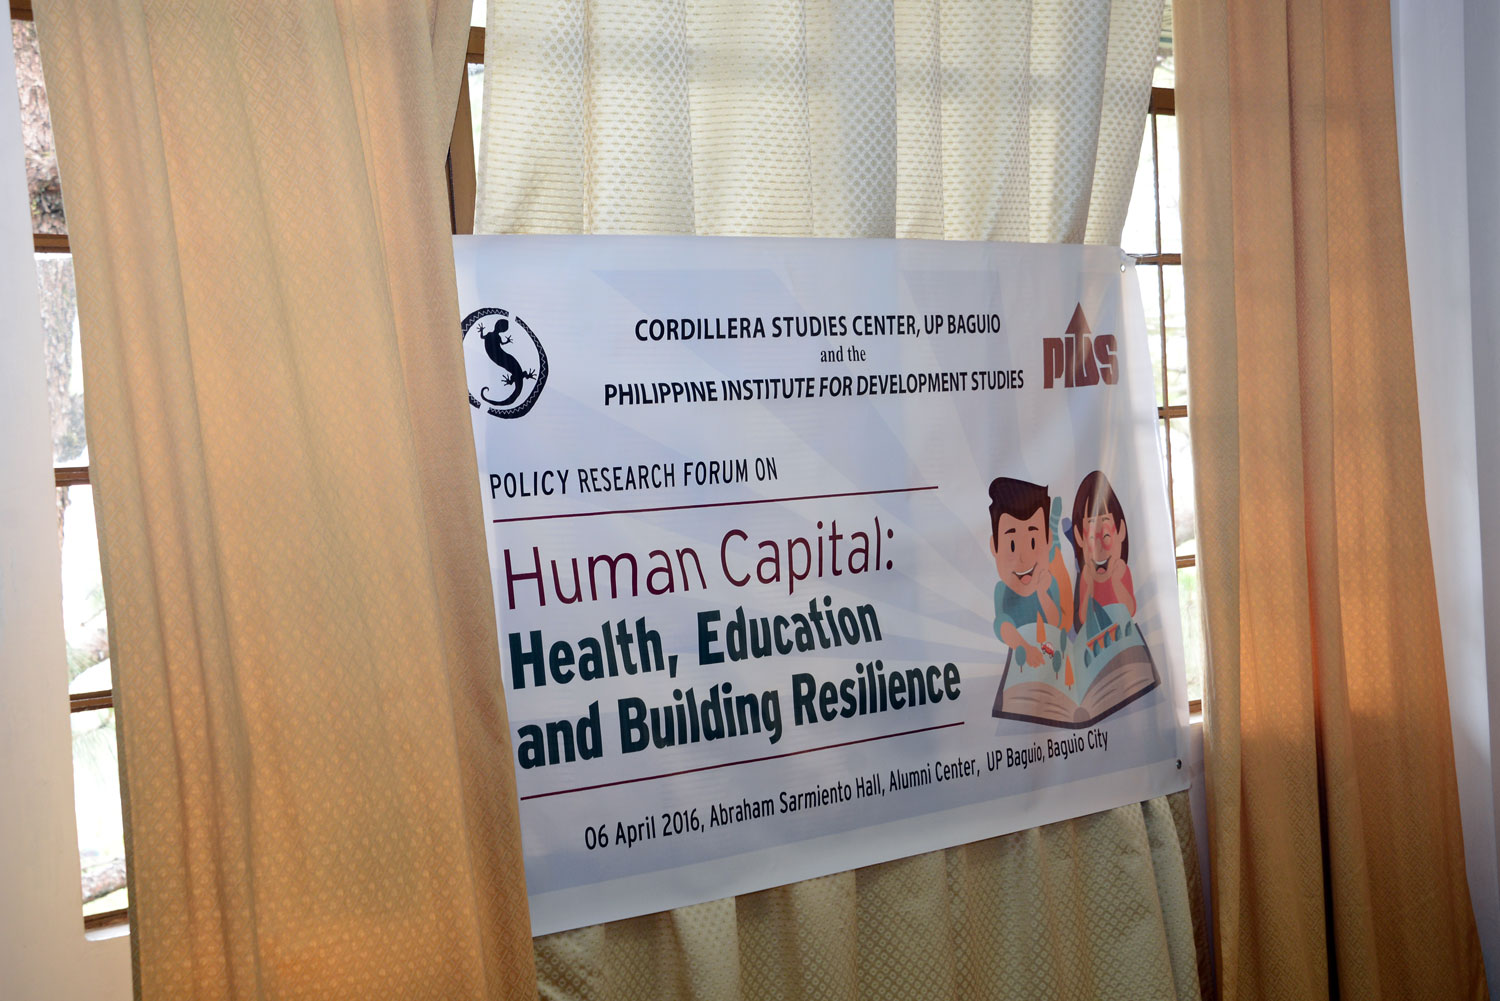 Policy Research Forum on Human Capital: Health, Education, and Building Resilience-DSC_6060.jpg